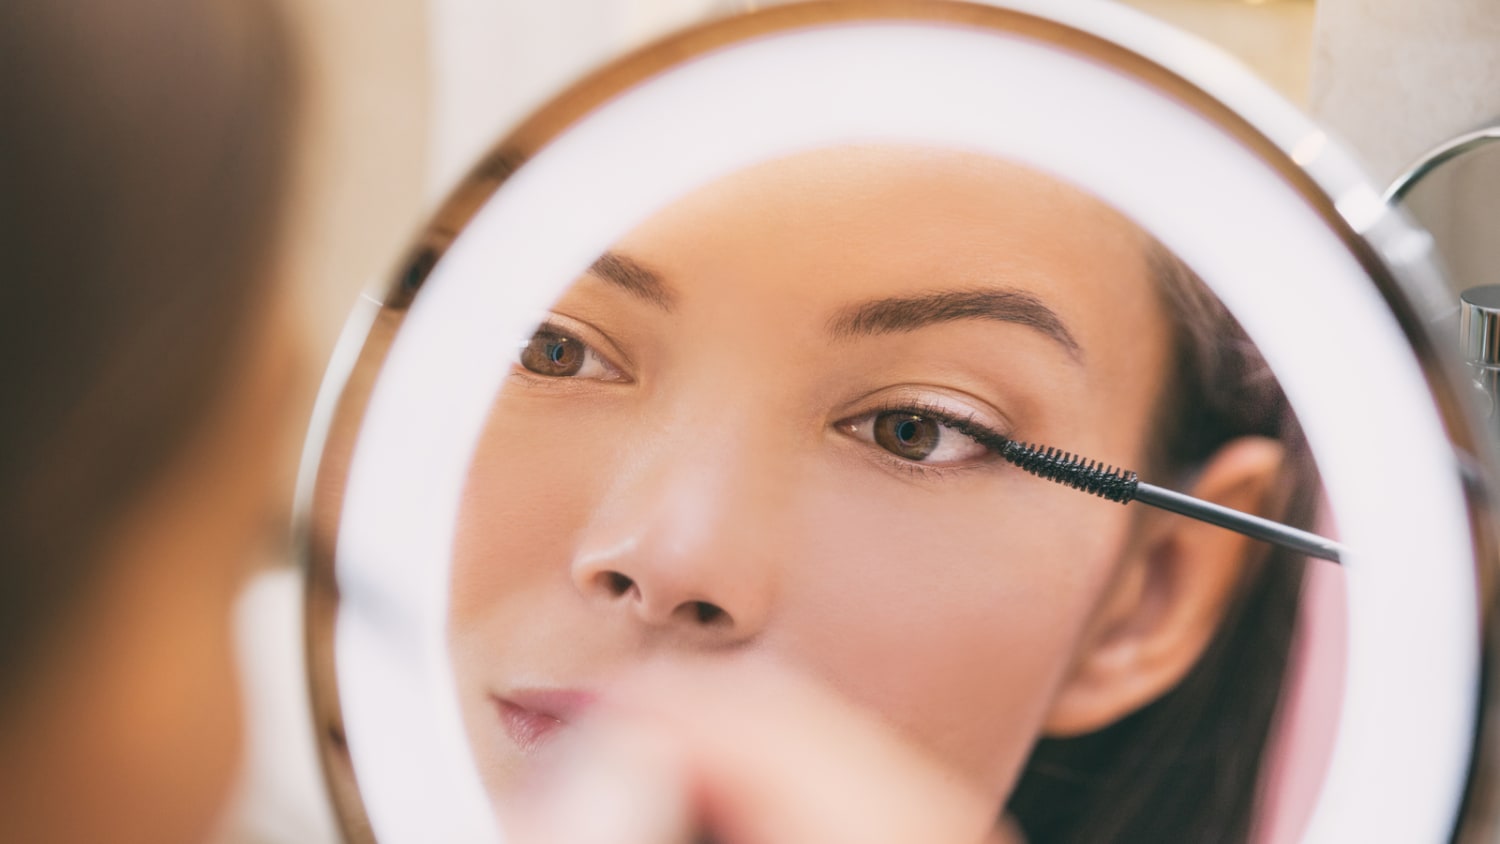 20 beauty and skincare hacks that actually work